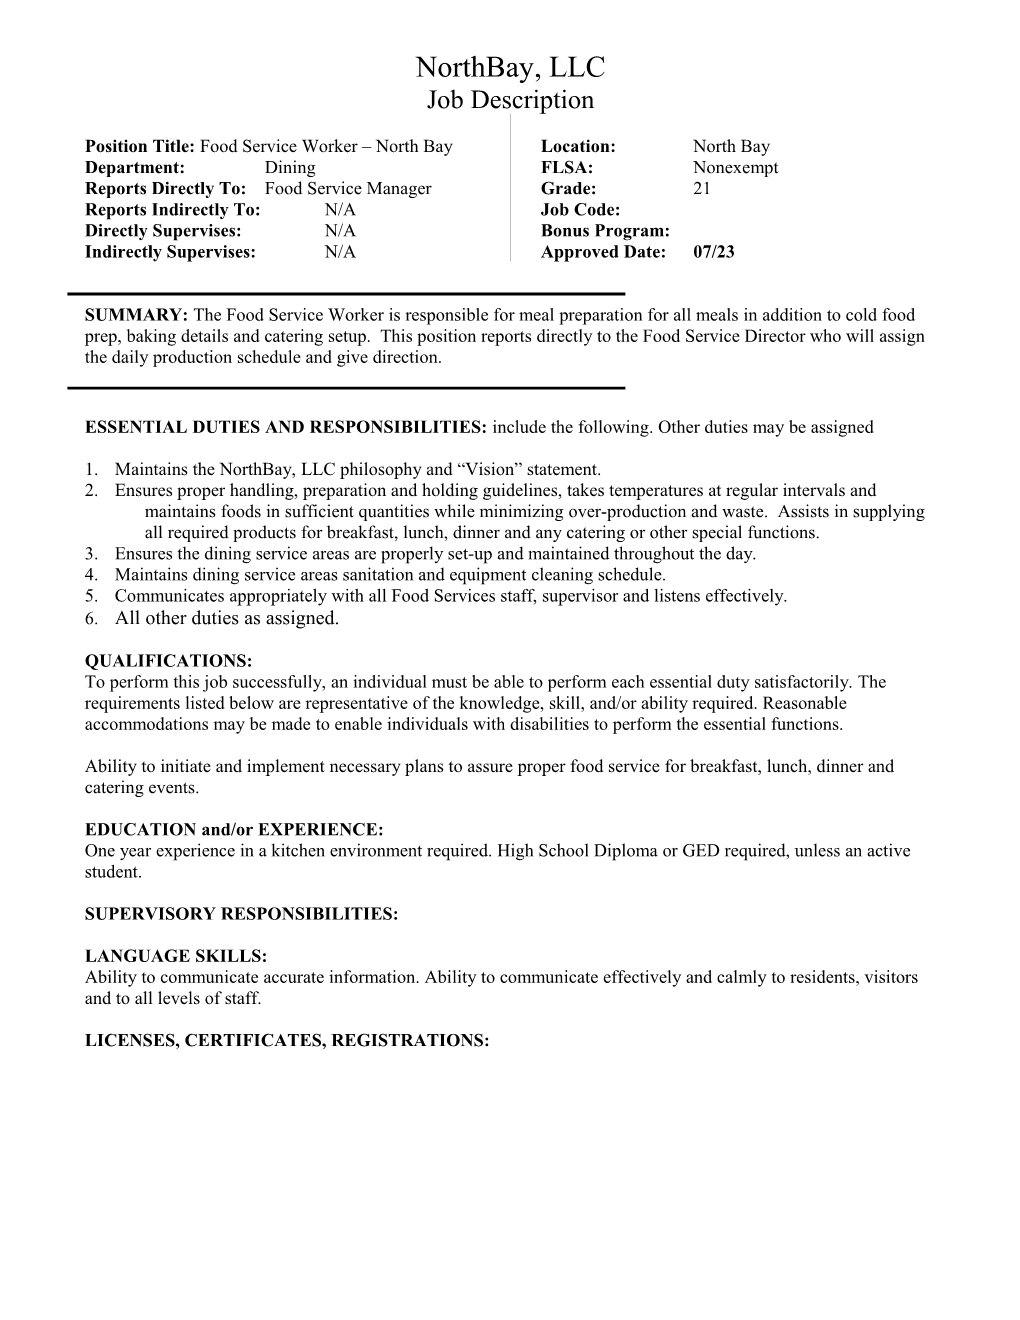 Position Title: Food Service Worker North Bay